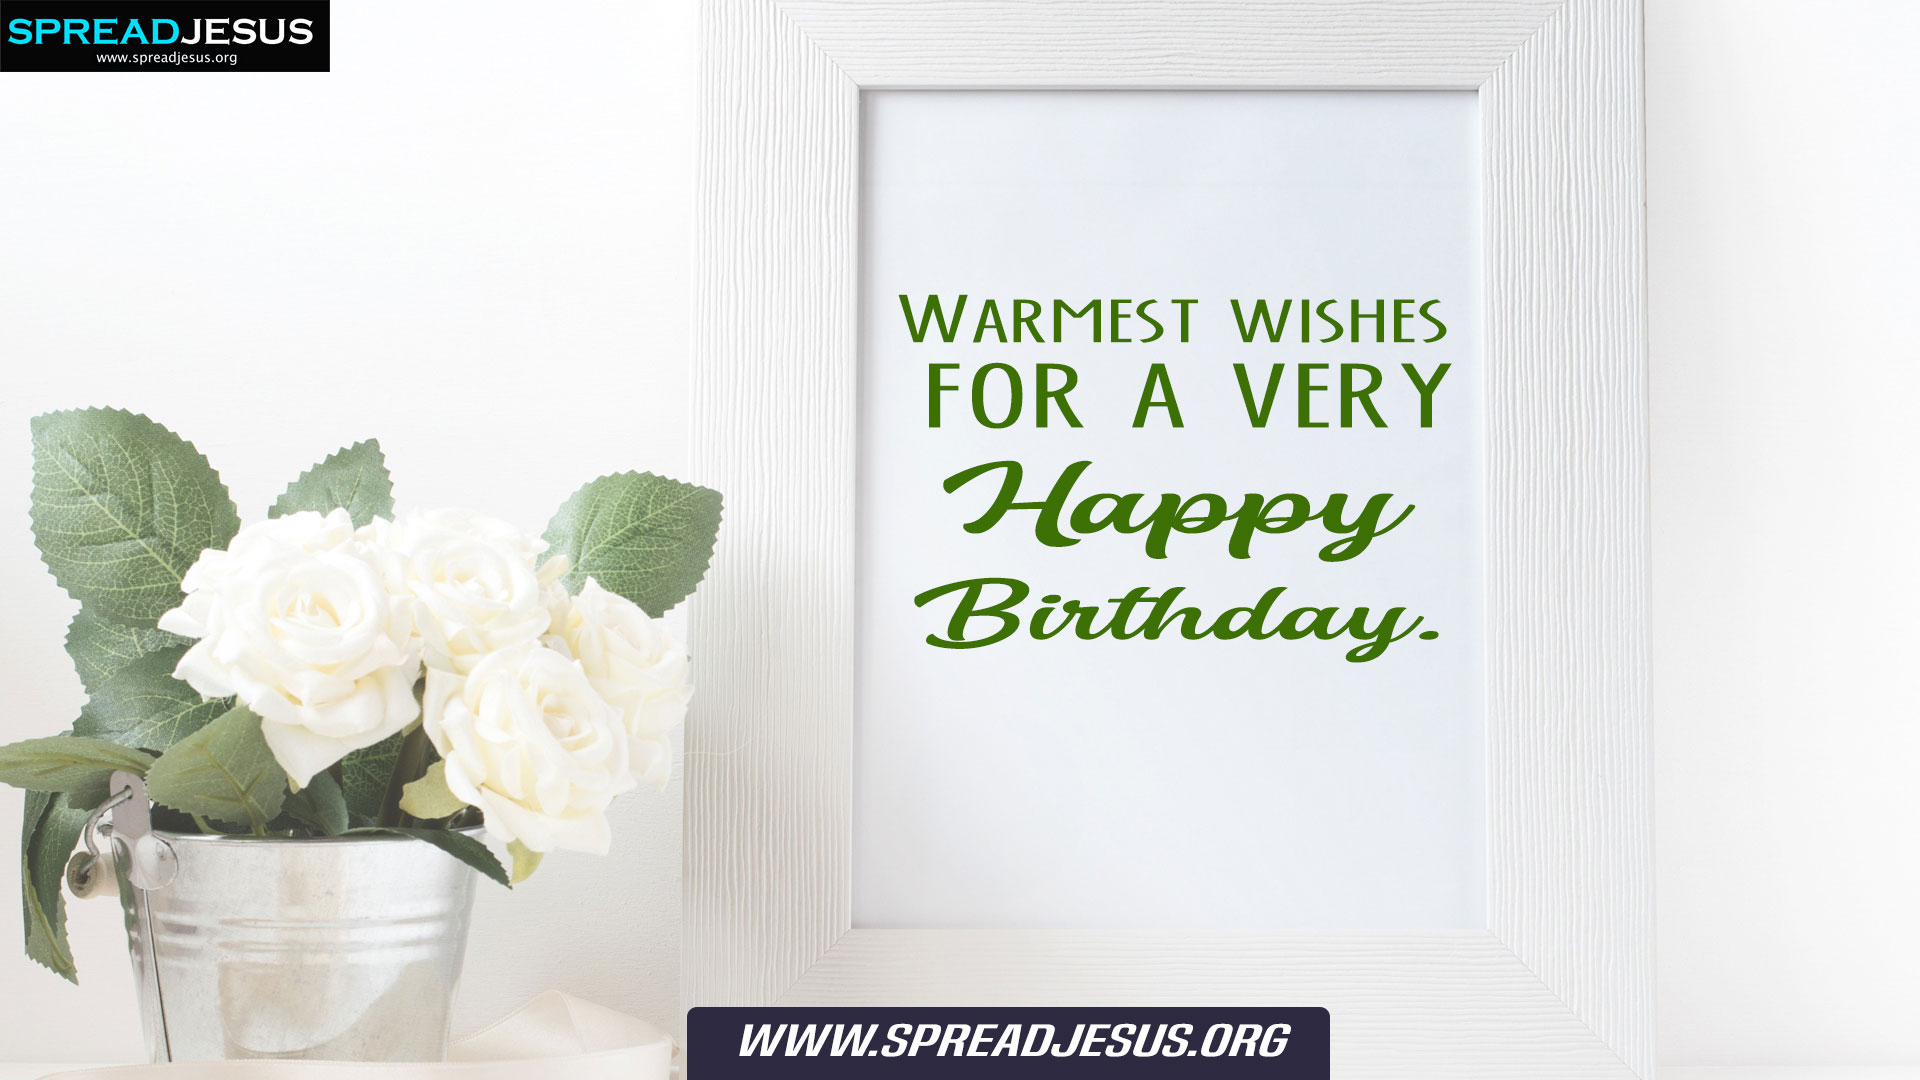 Warmest wishes for a very Happy Birthday